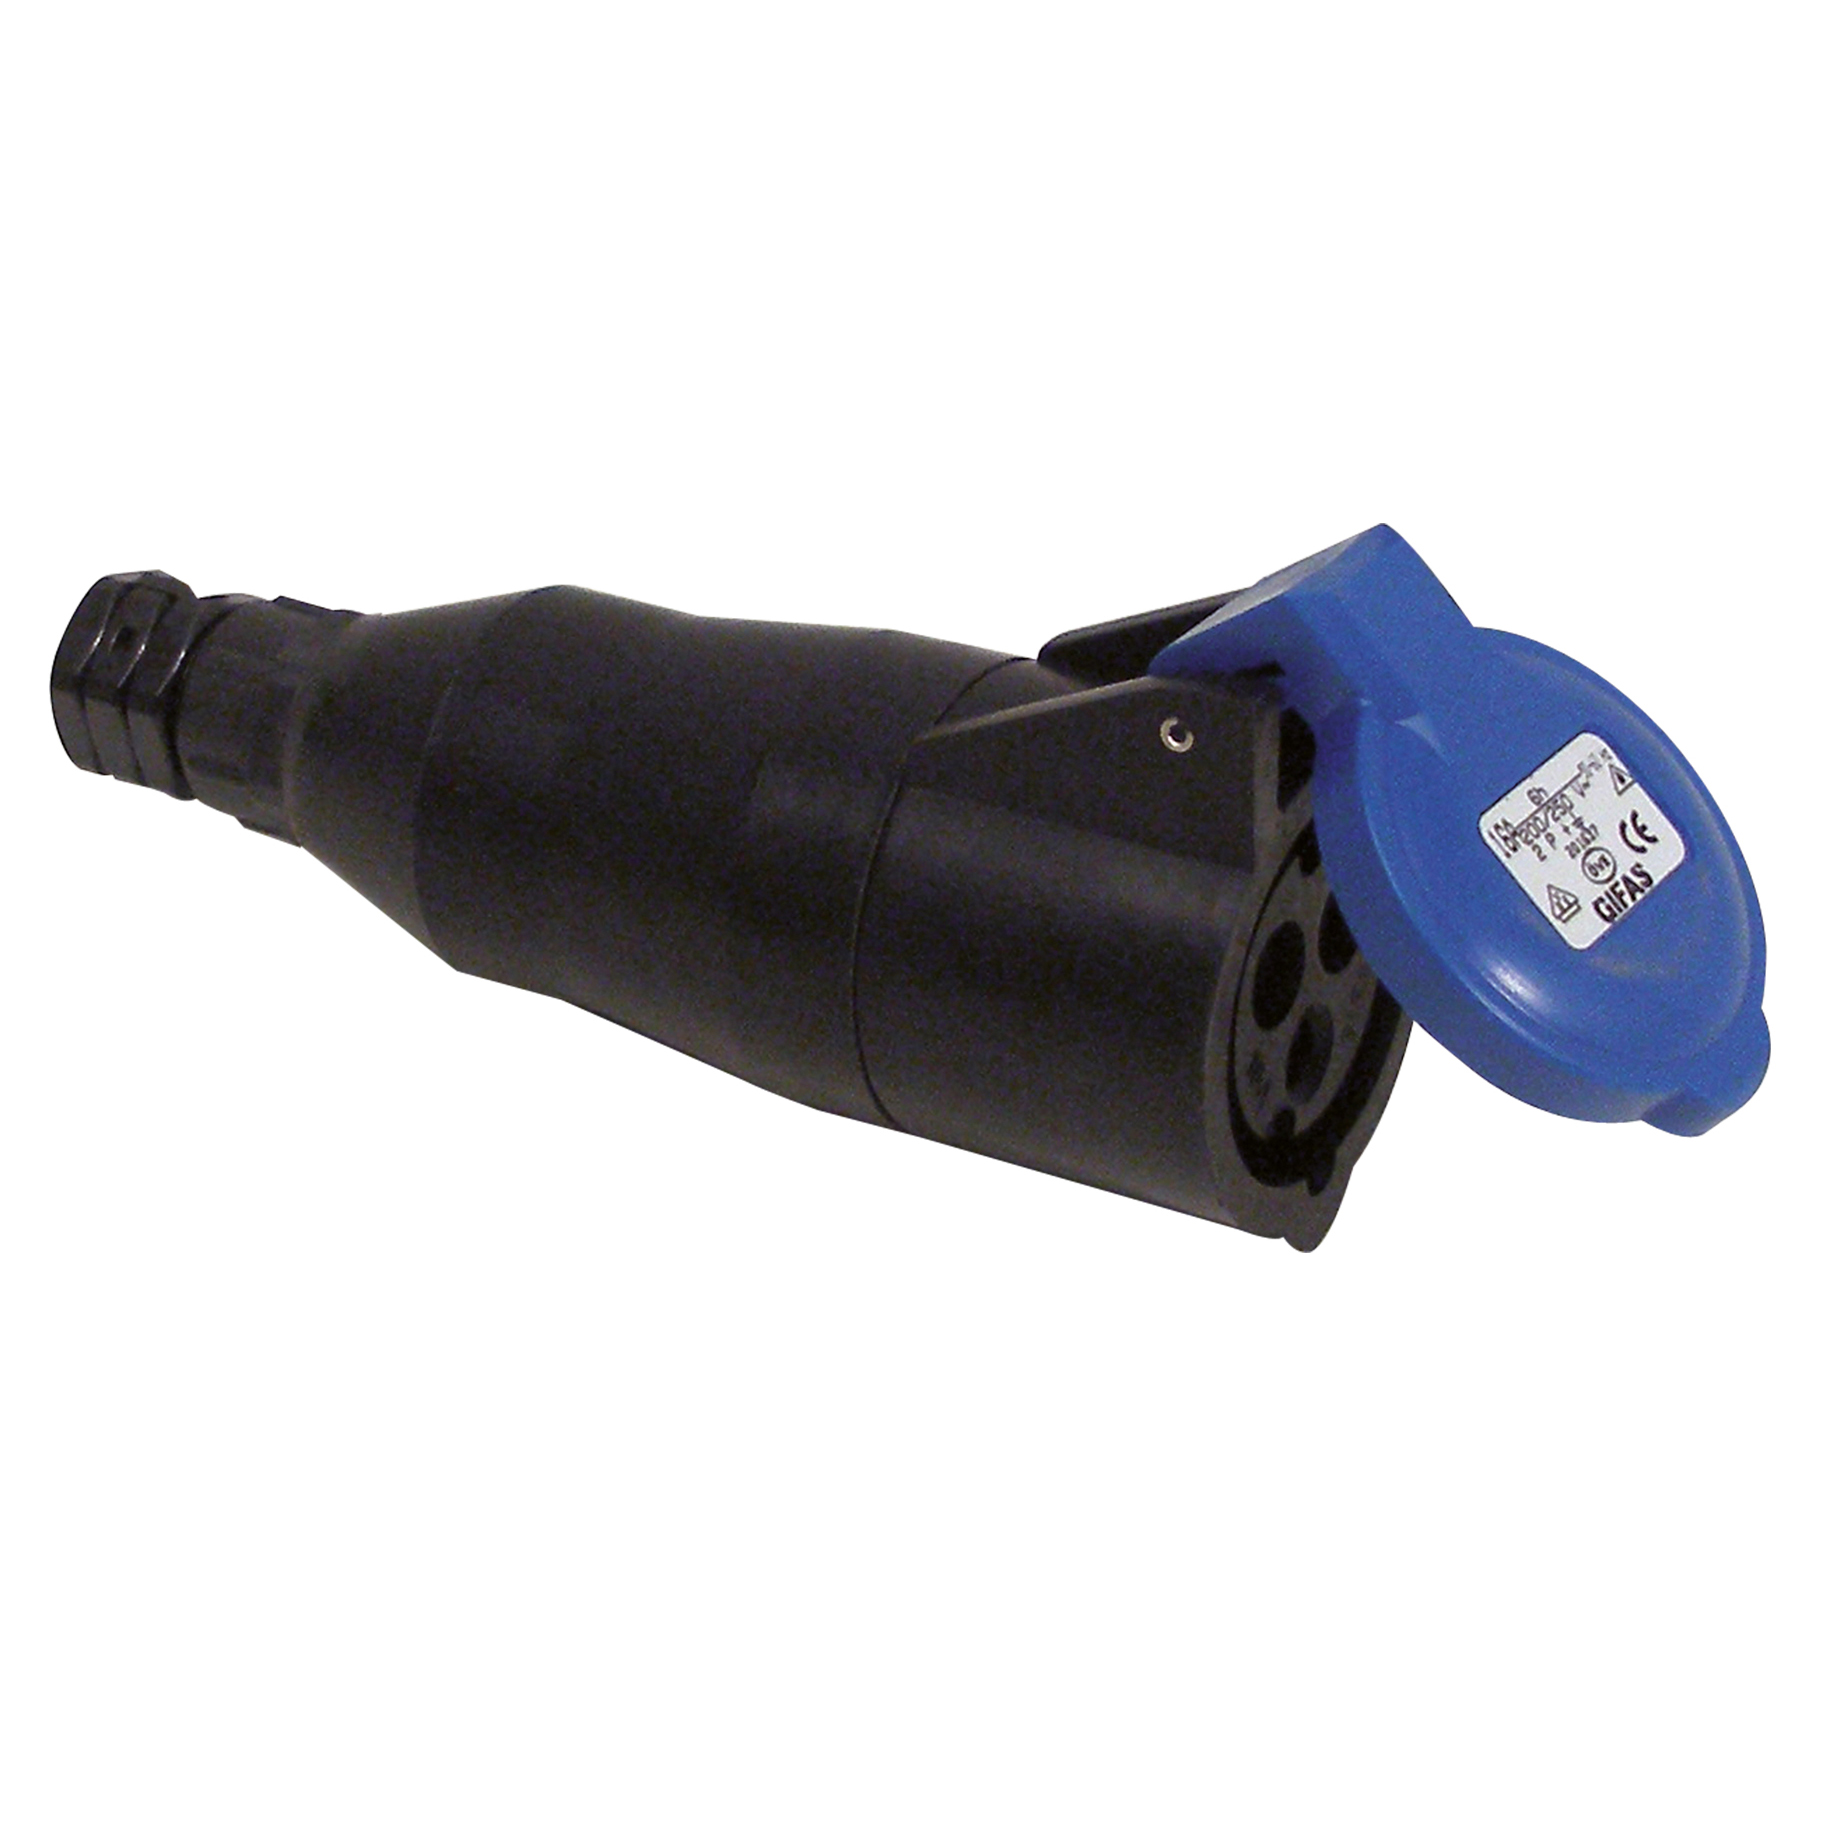 GIFAS Solid Rubber CEE Connector 16A 230V 3-pole (120150)